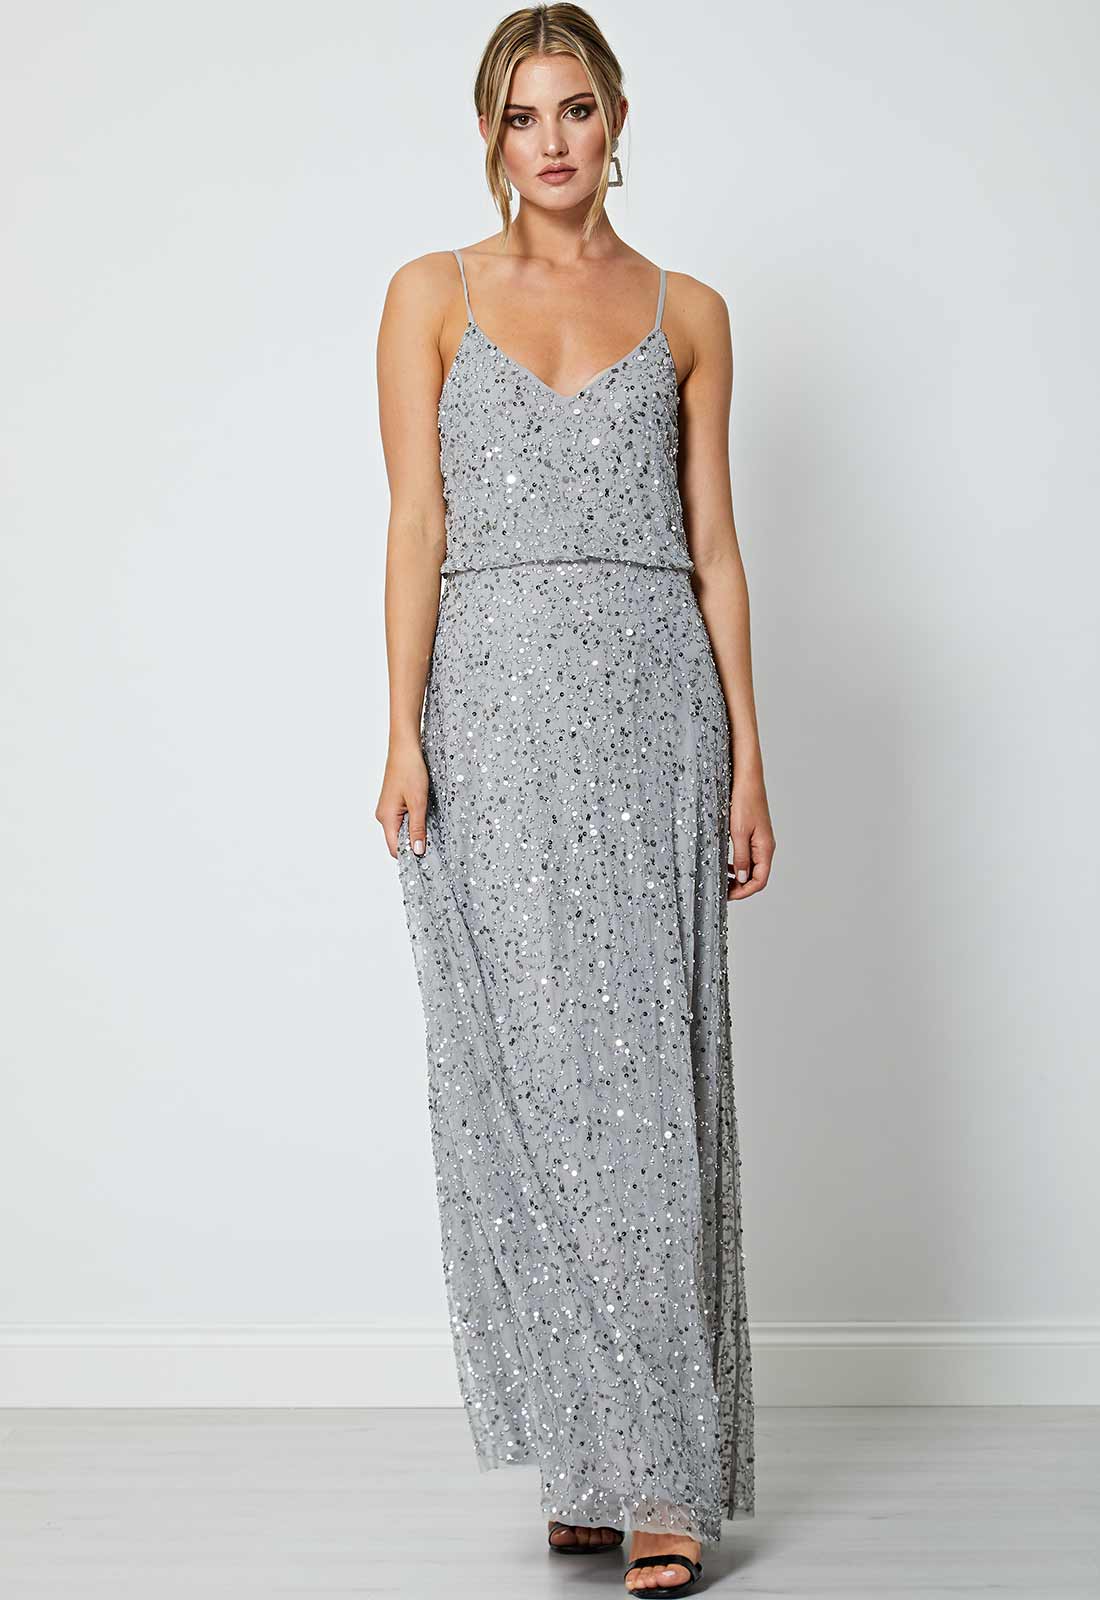 ANGELEYE Silver Lucy Embellished Maxi Dress-73686